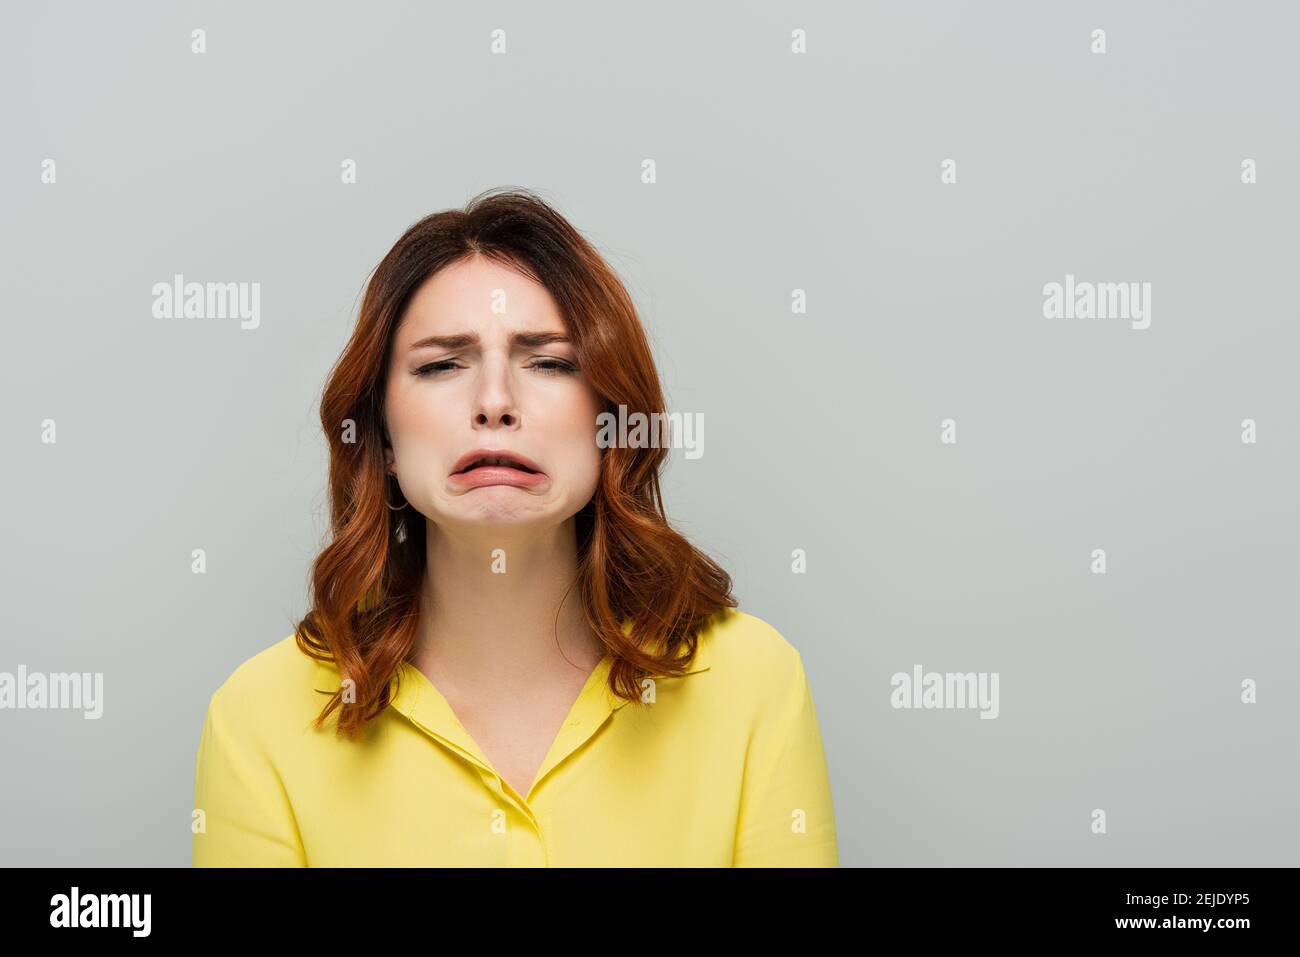 discouraged woman looking at camera and grimacing isolated on grey Stock Photo